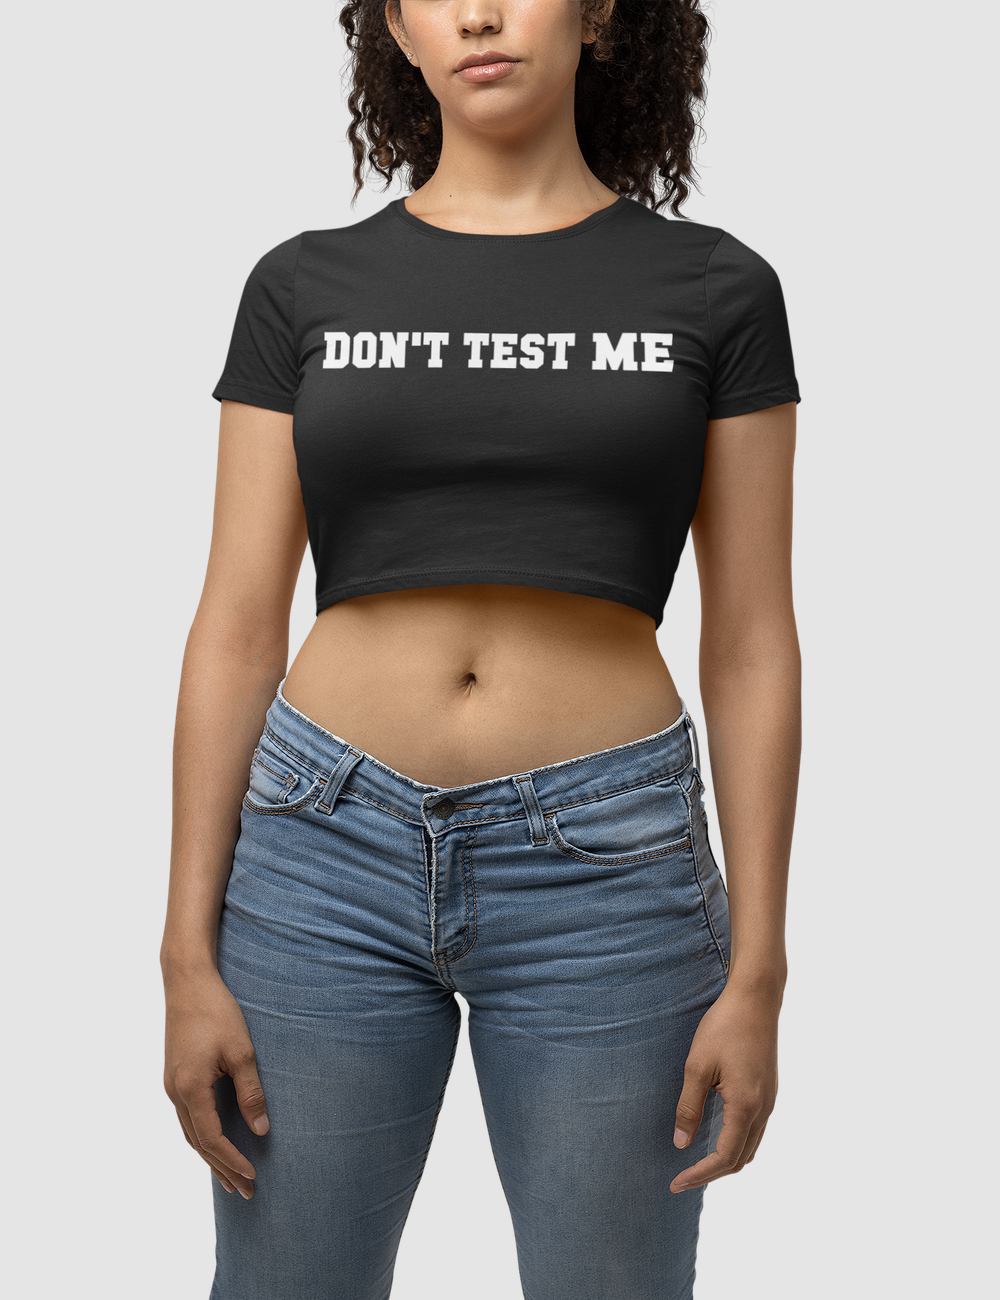 Don't Test Me Women's Fitted Crop Top T-Shirt OniTakai